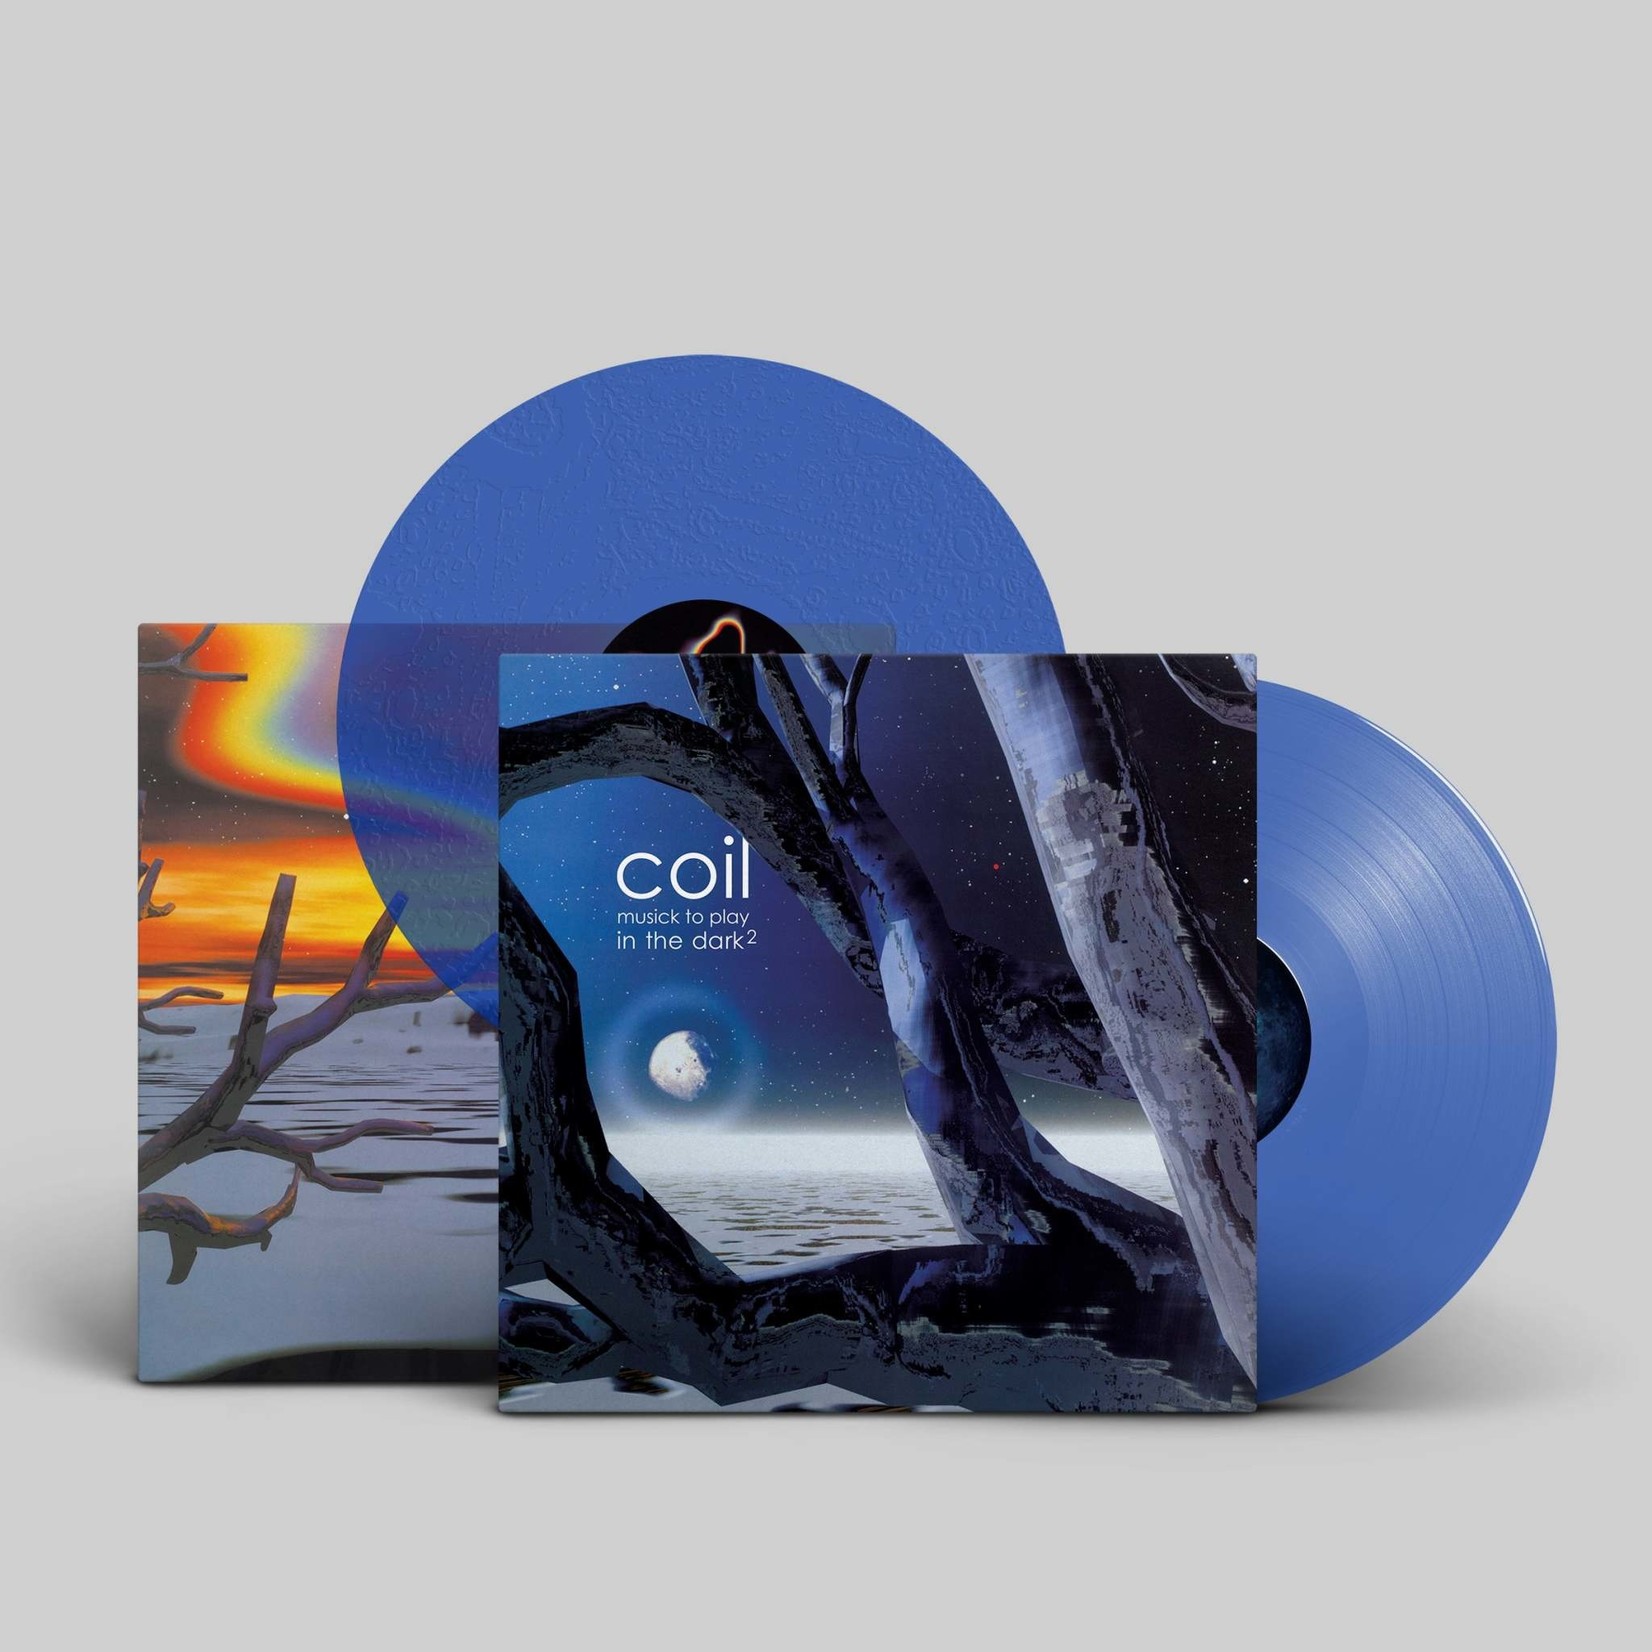 [New] Coil - Musick To Play In The Dark¬¨‚â§ (2LP, clear blue vinyl)